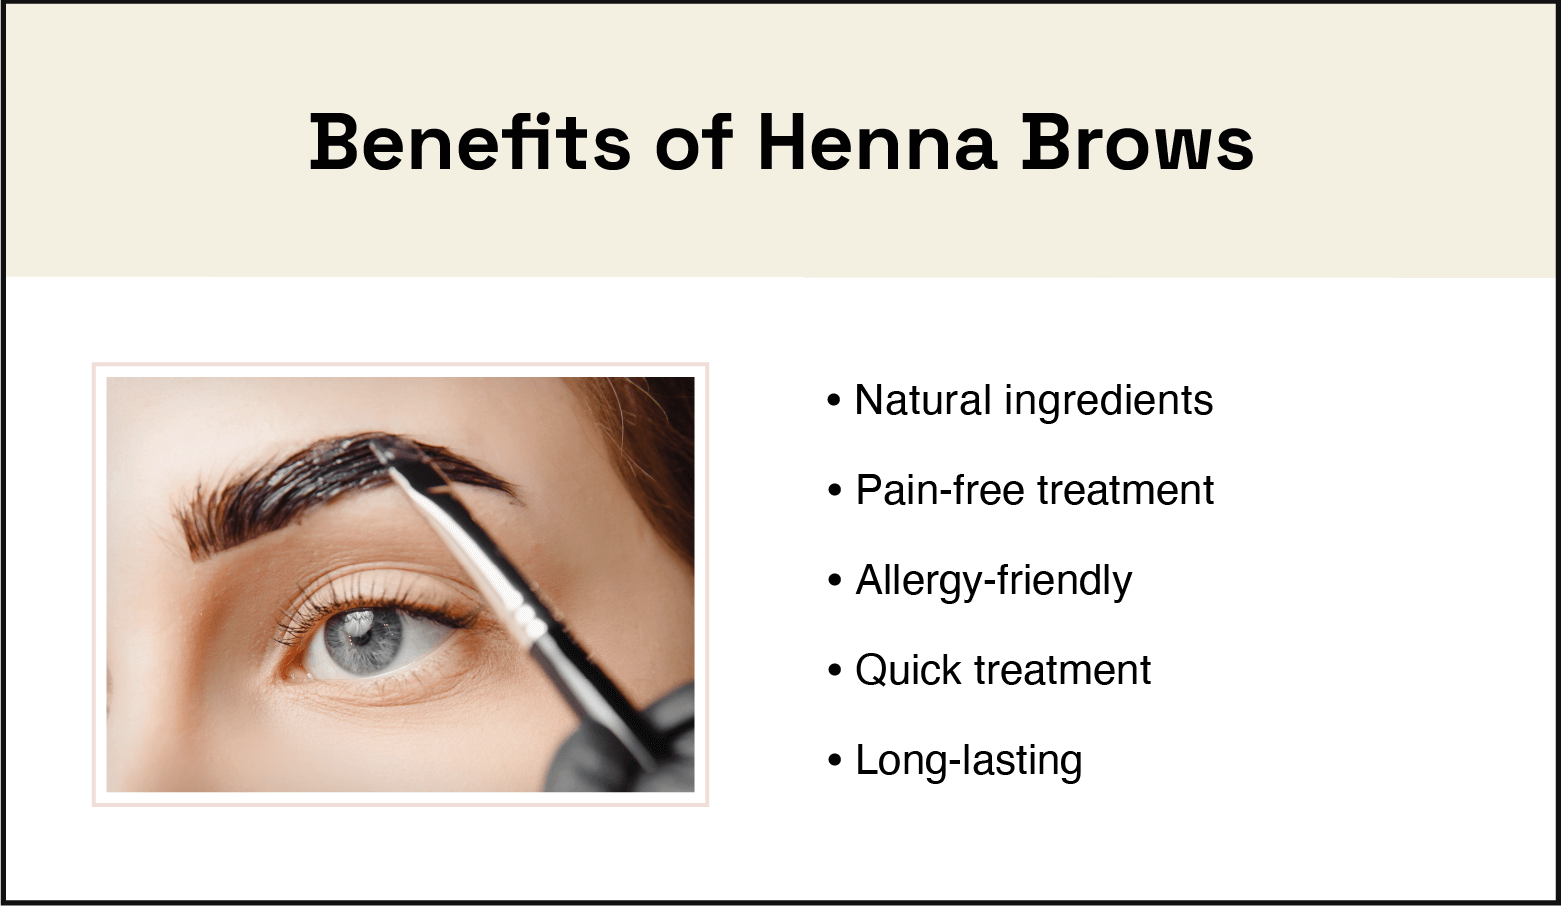 close-up photo of person with dark brows, light skin, and light blue eyes on the left, summary of benefits of henna brows on the right